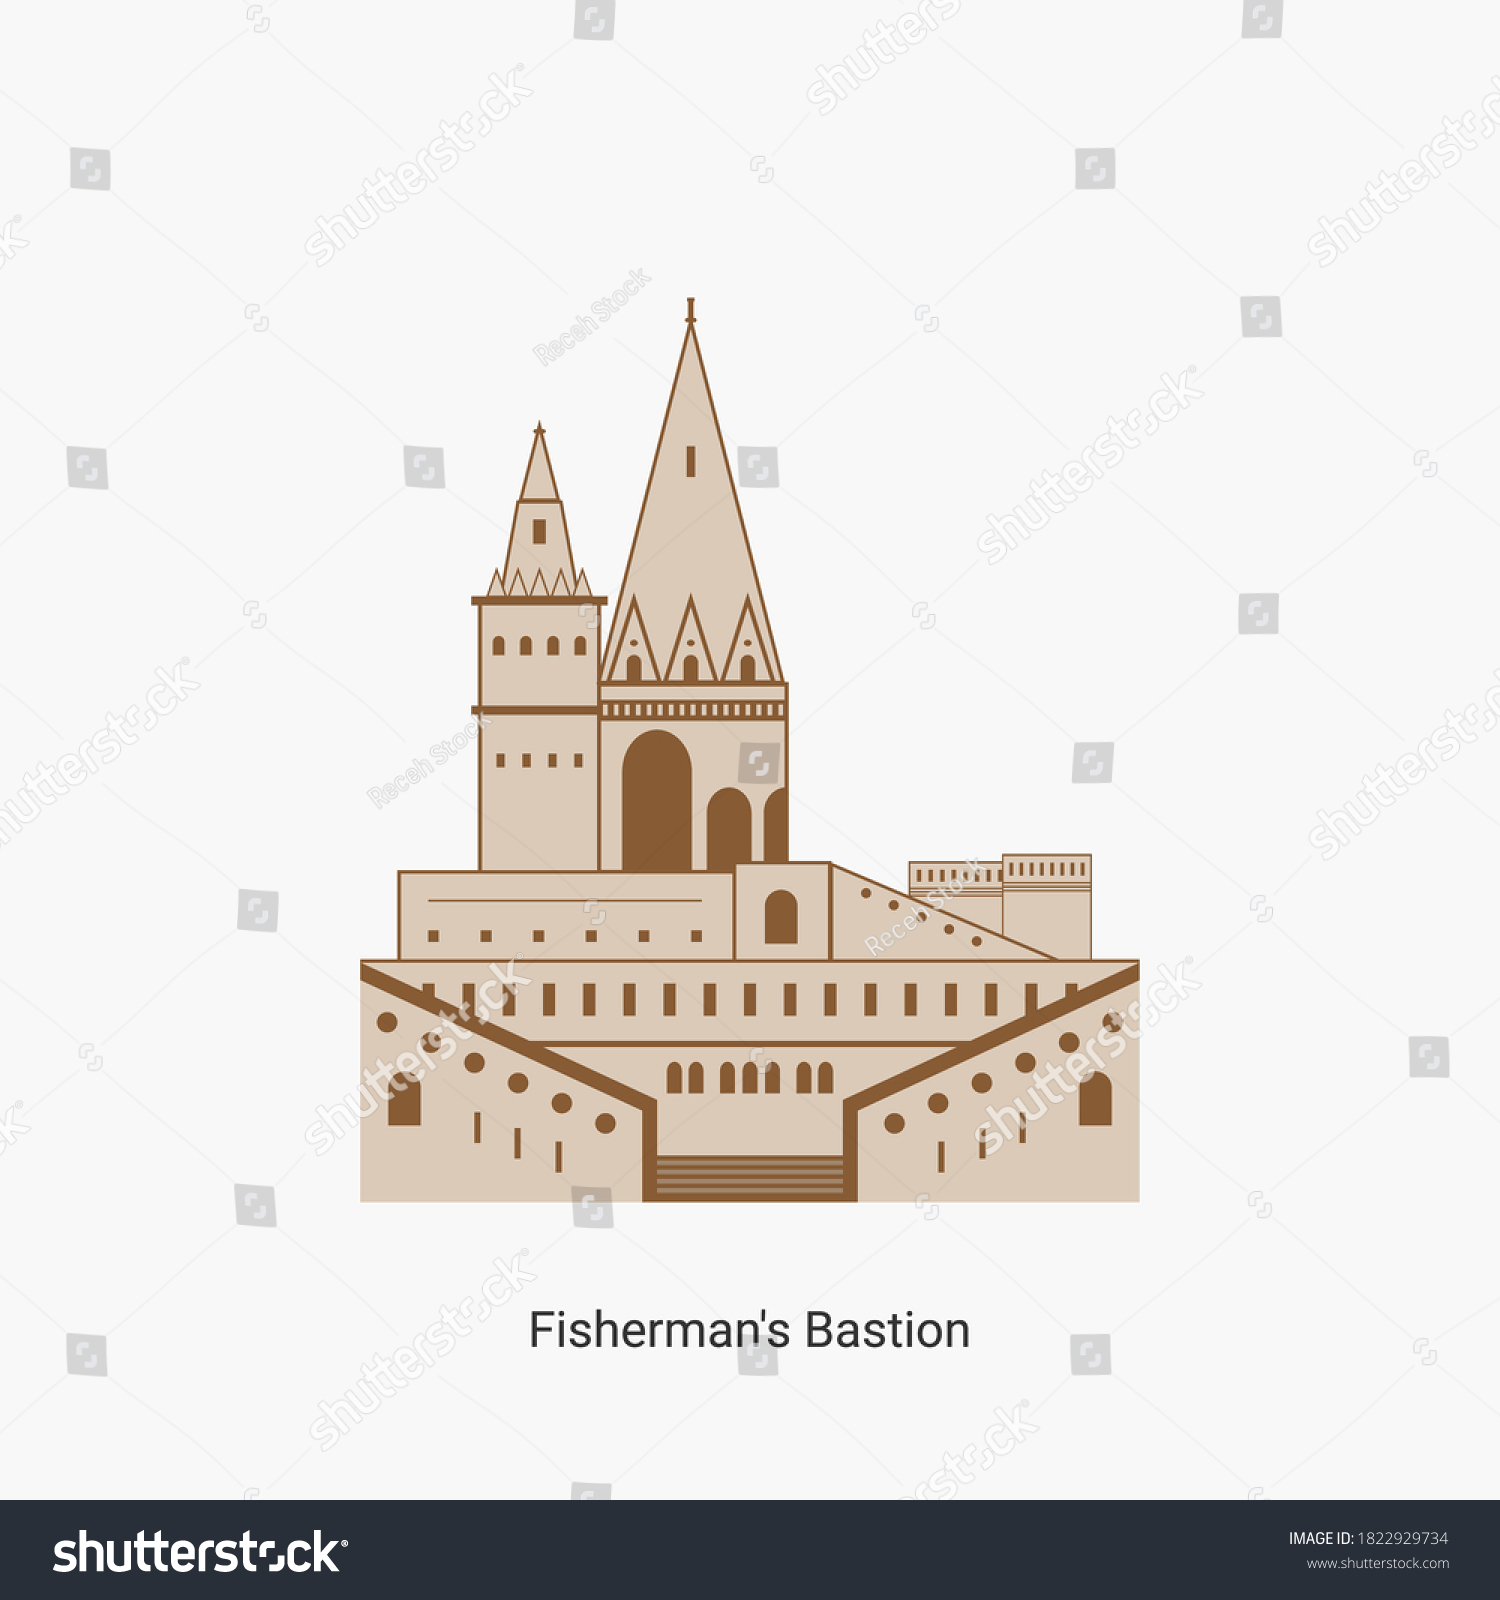 SVG of Fisherman's bastion towers in Hungary capital icon. Hungarian tourist destination you have to visit. Best historical landmark located in the Buda Castle. Vector art illustration flat design. svg